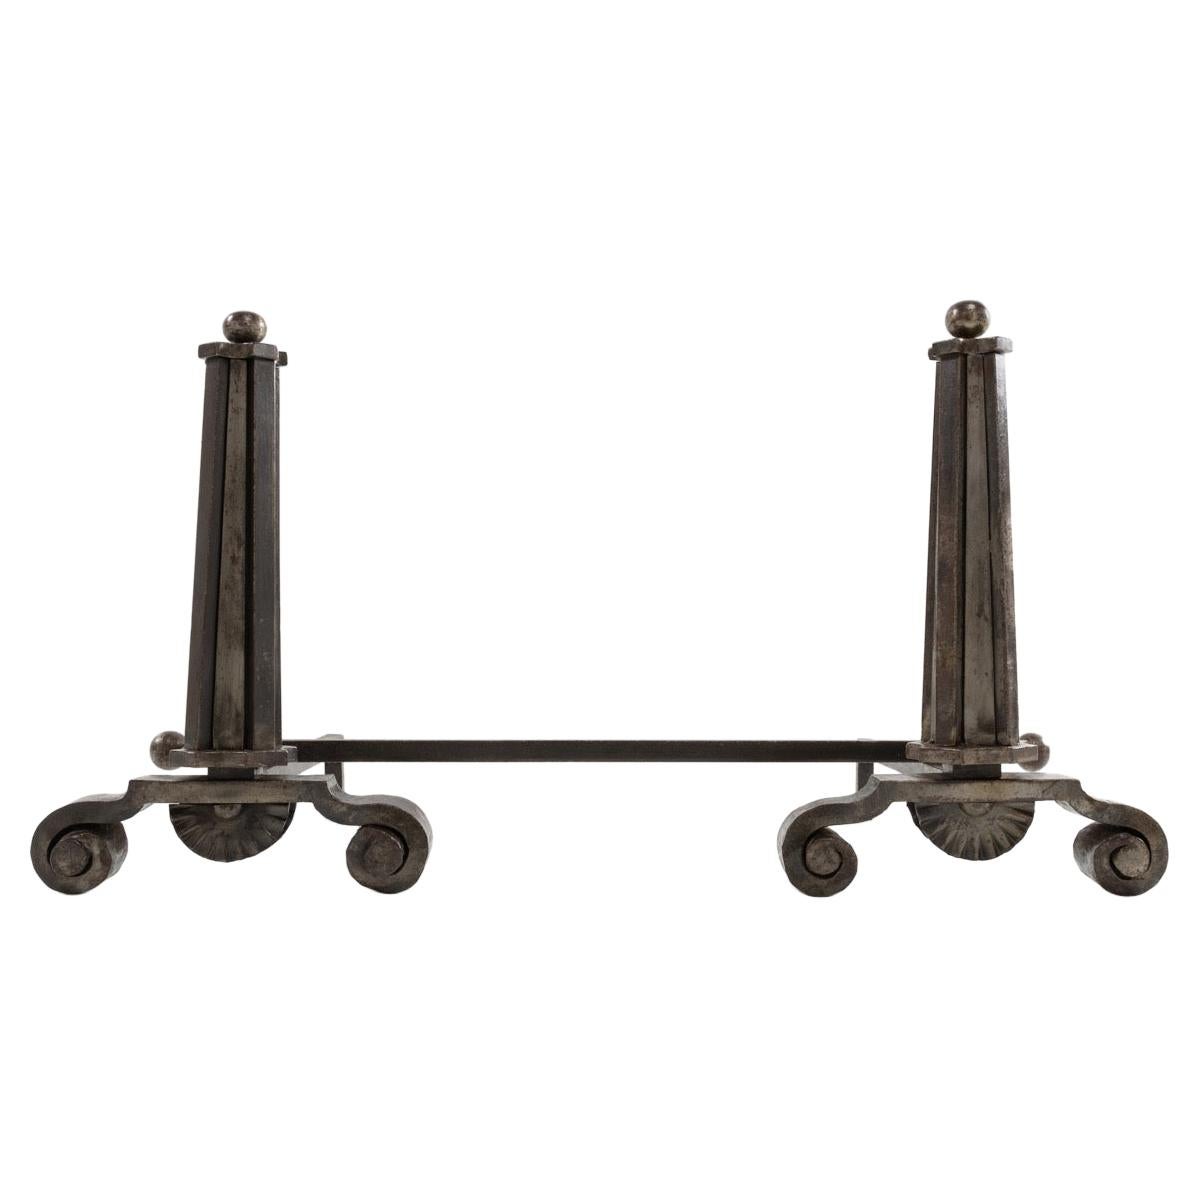 Pair of Wrought Iron Andirons, Art Deco Period, Raymond Subes 'France'